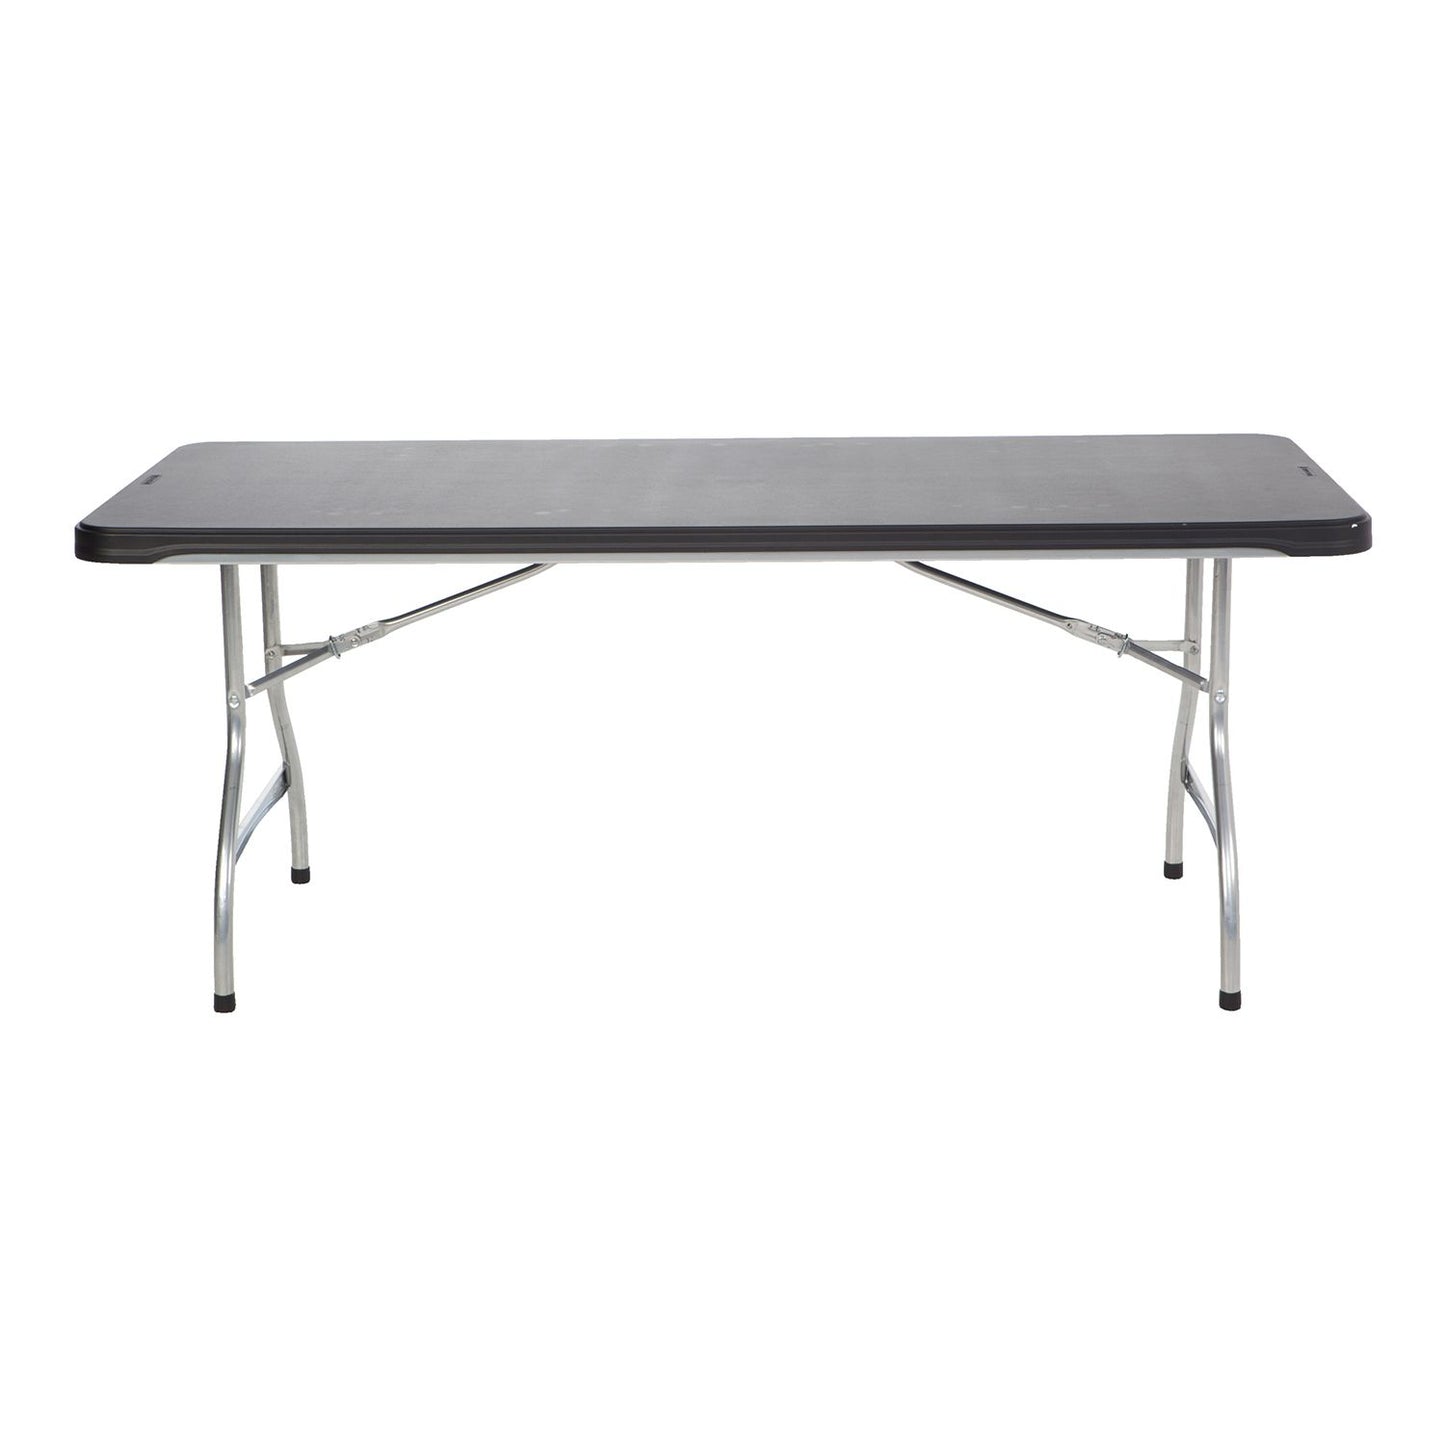 Lifetime 6' Commercial Grade Stacking Folding Table, Select Color